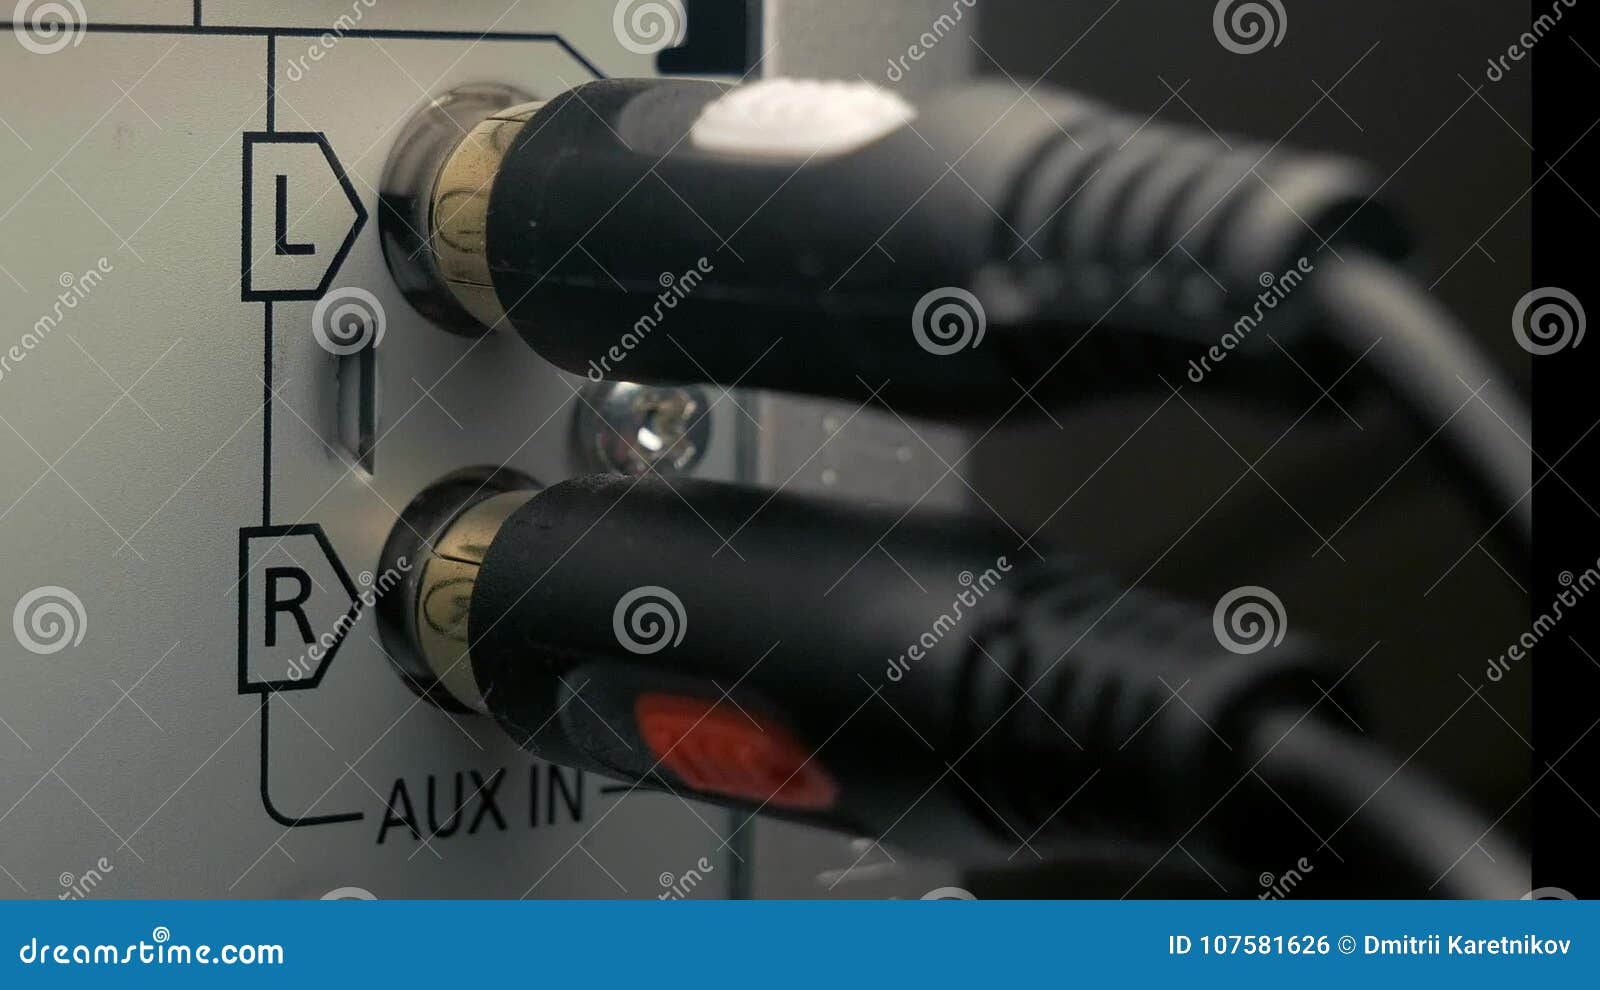 aux audio which is right and left